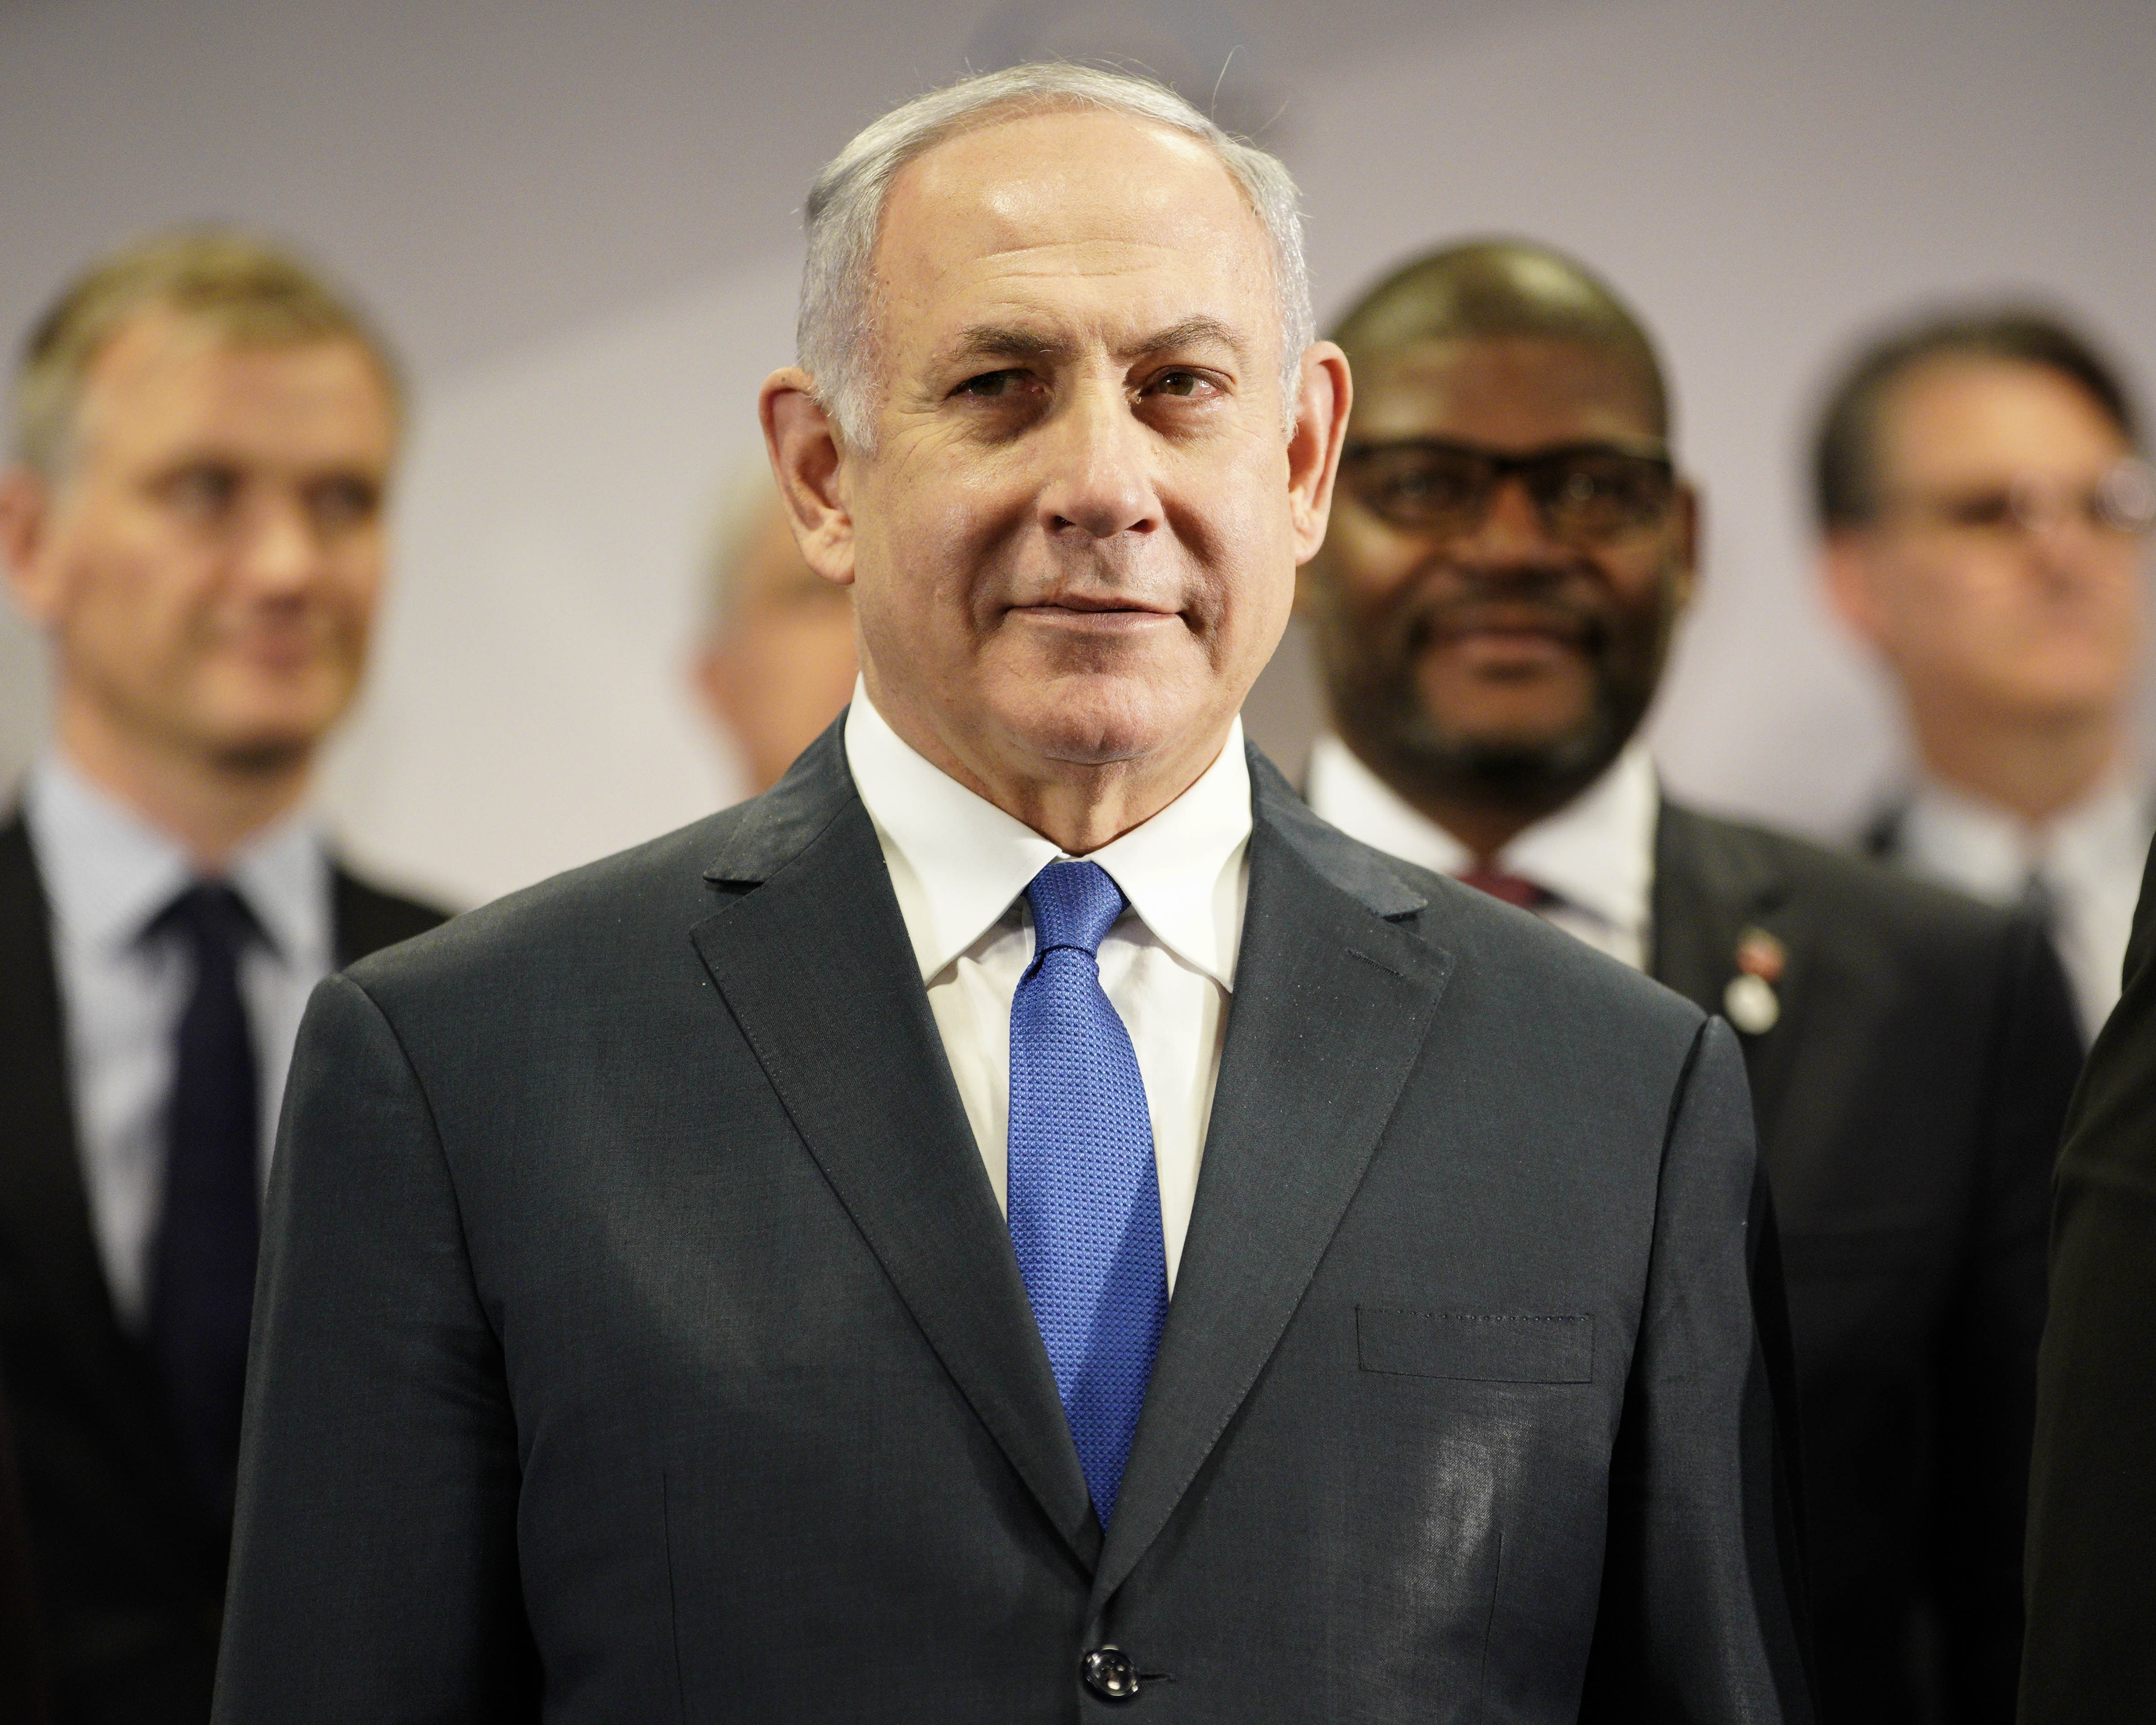 UPDATE 1-Netanyahu's trial to begin on March 17 - Israeli Justice Ministry